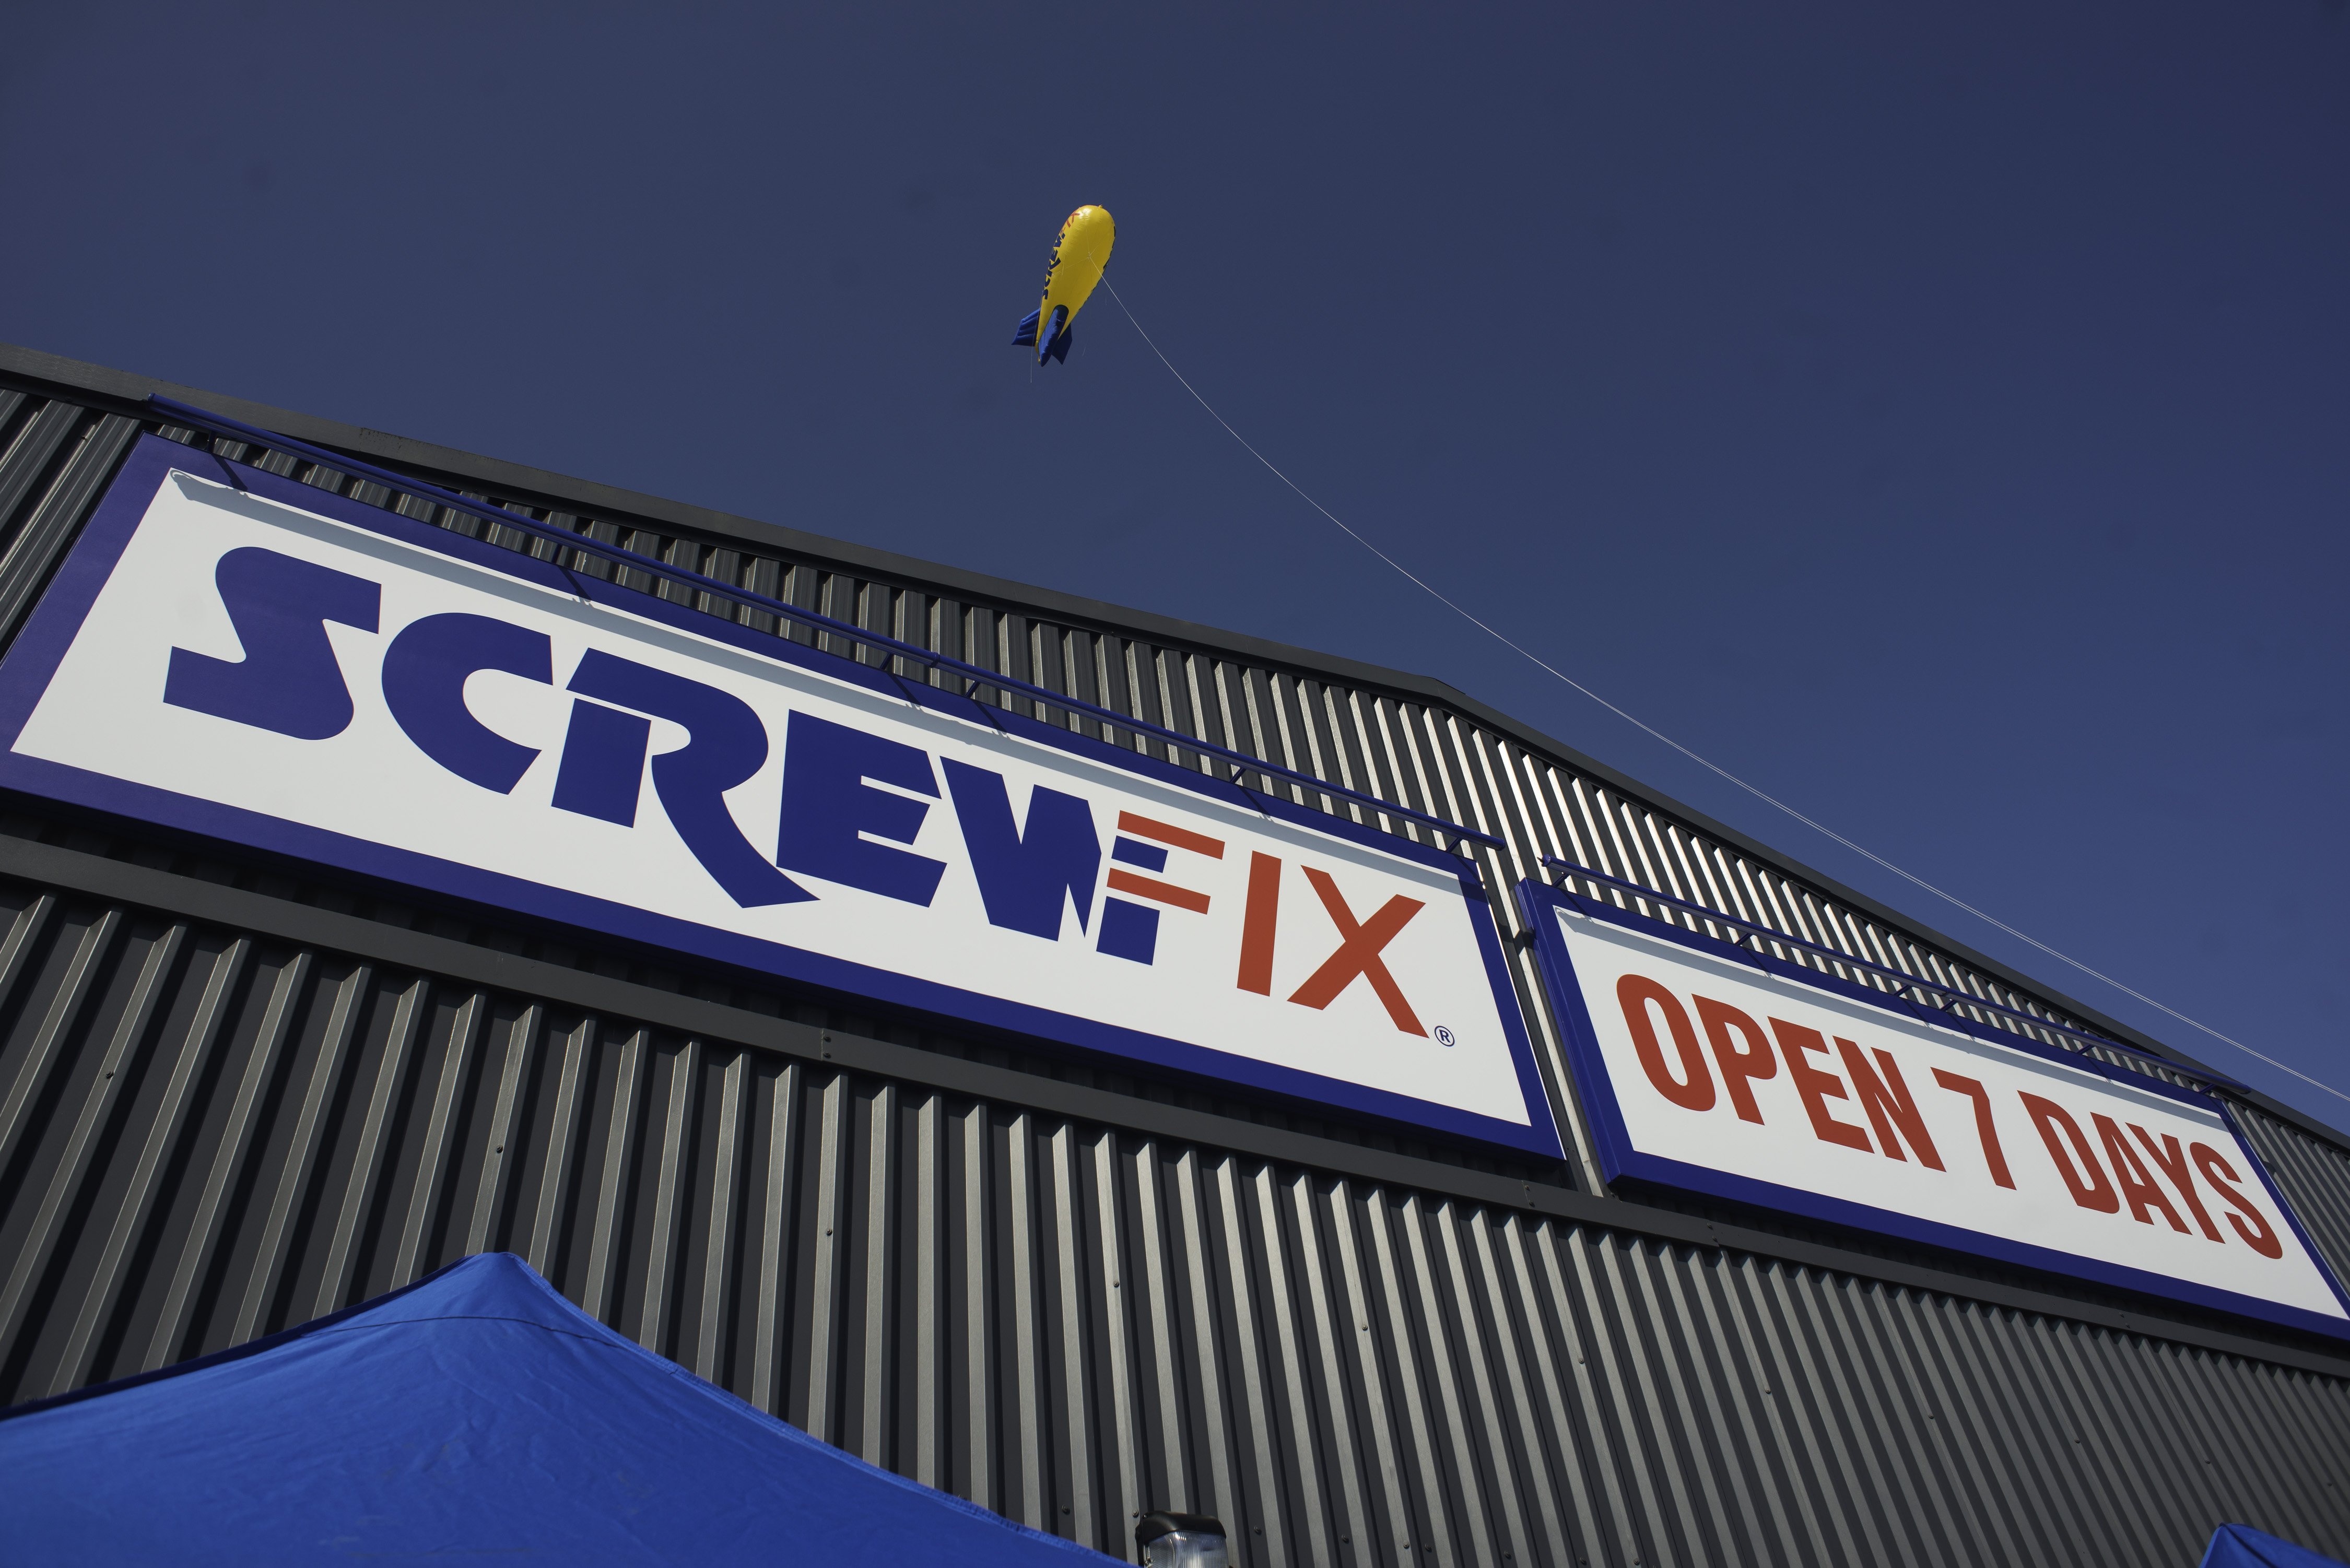 Clacton-on-Sea first Screwfix store to open on 25th June